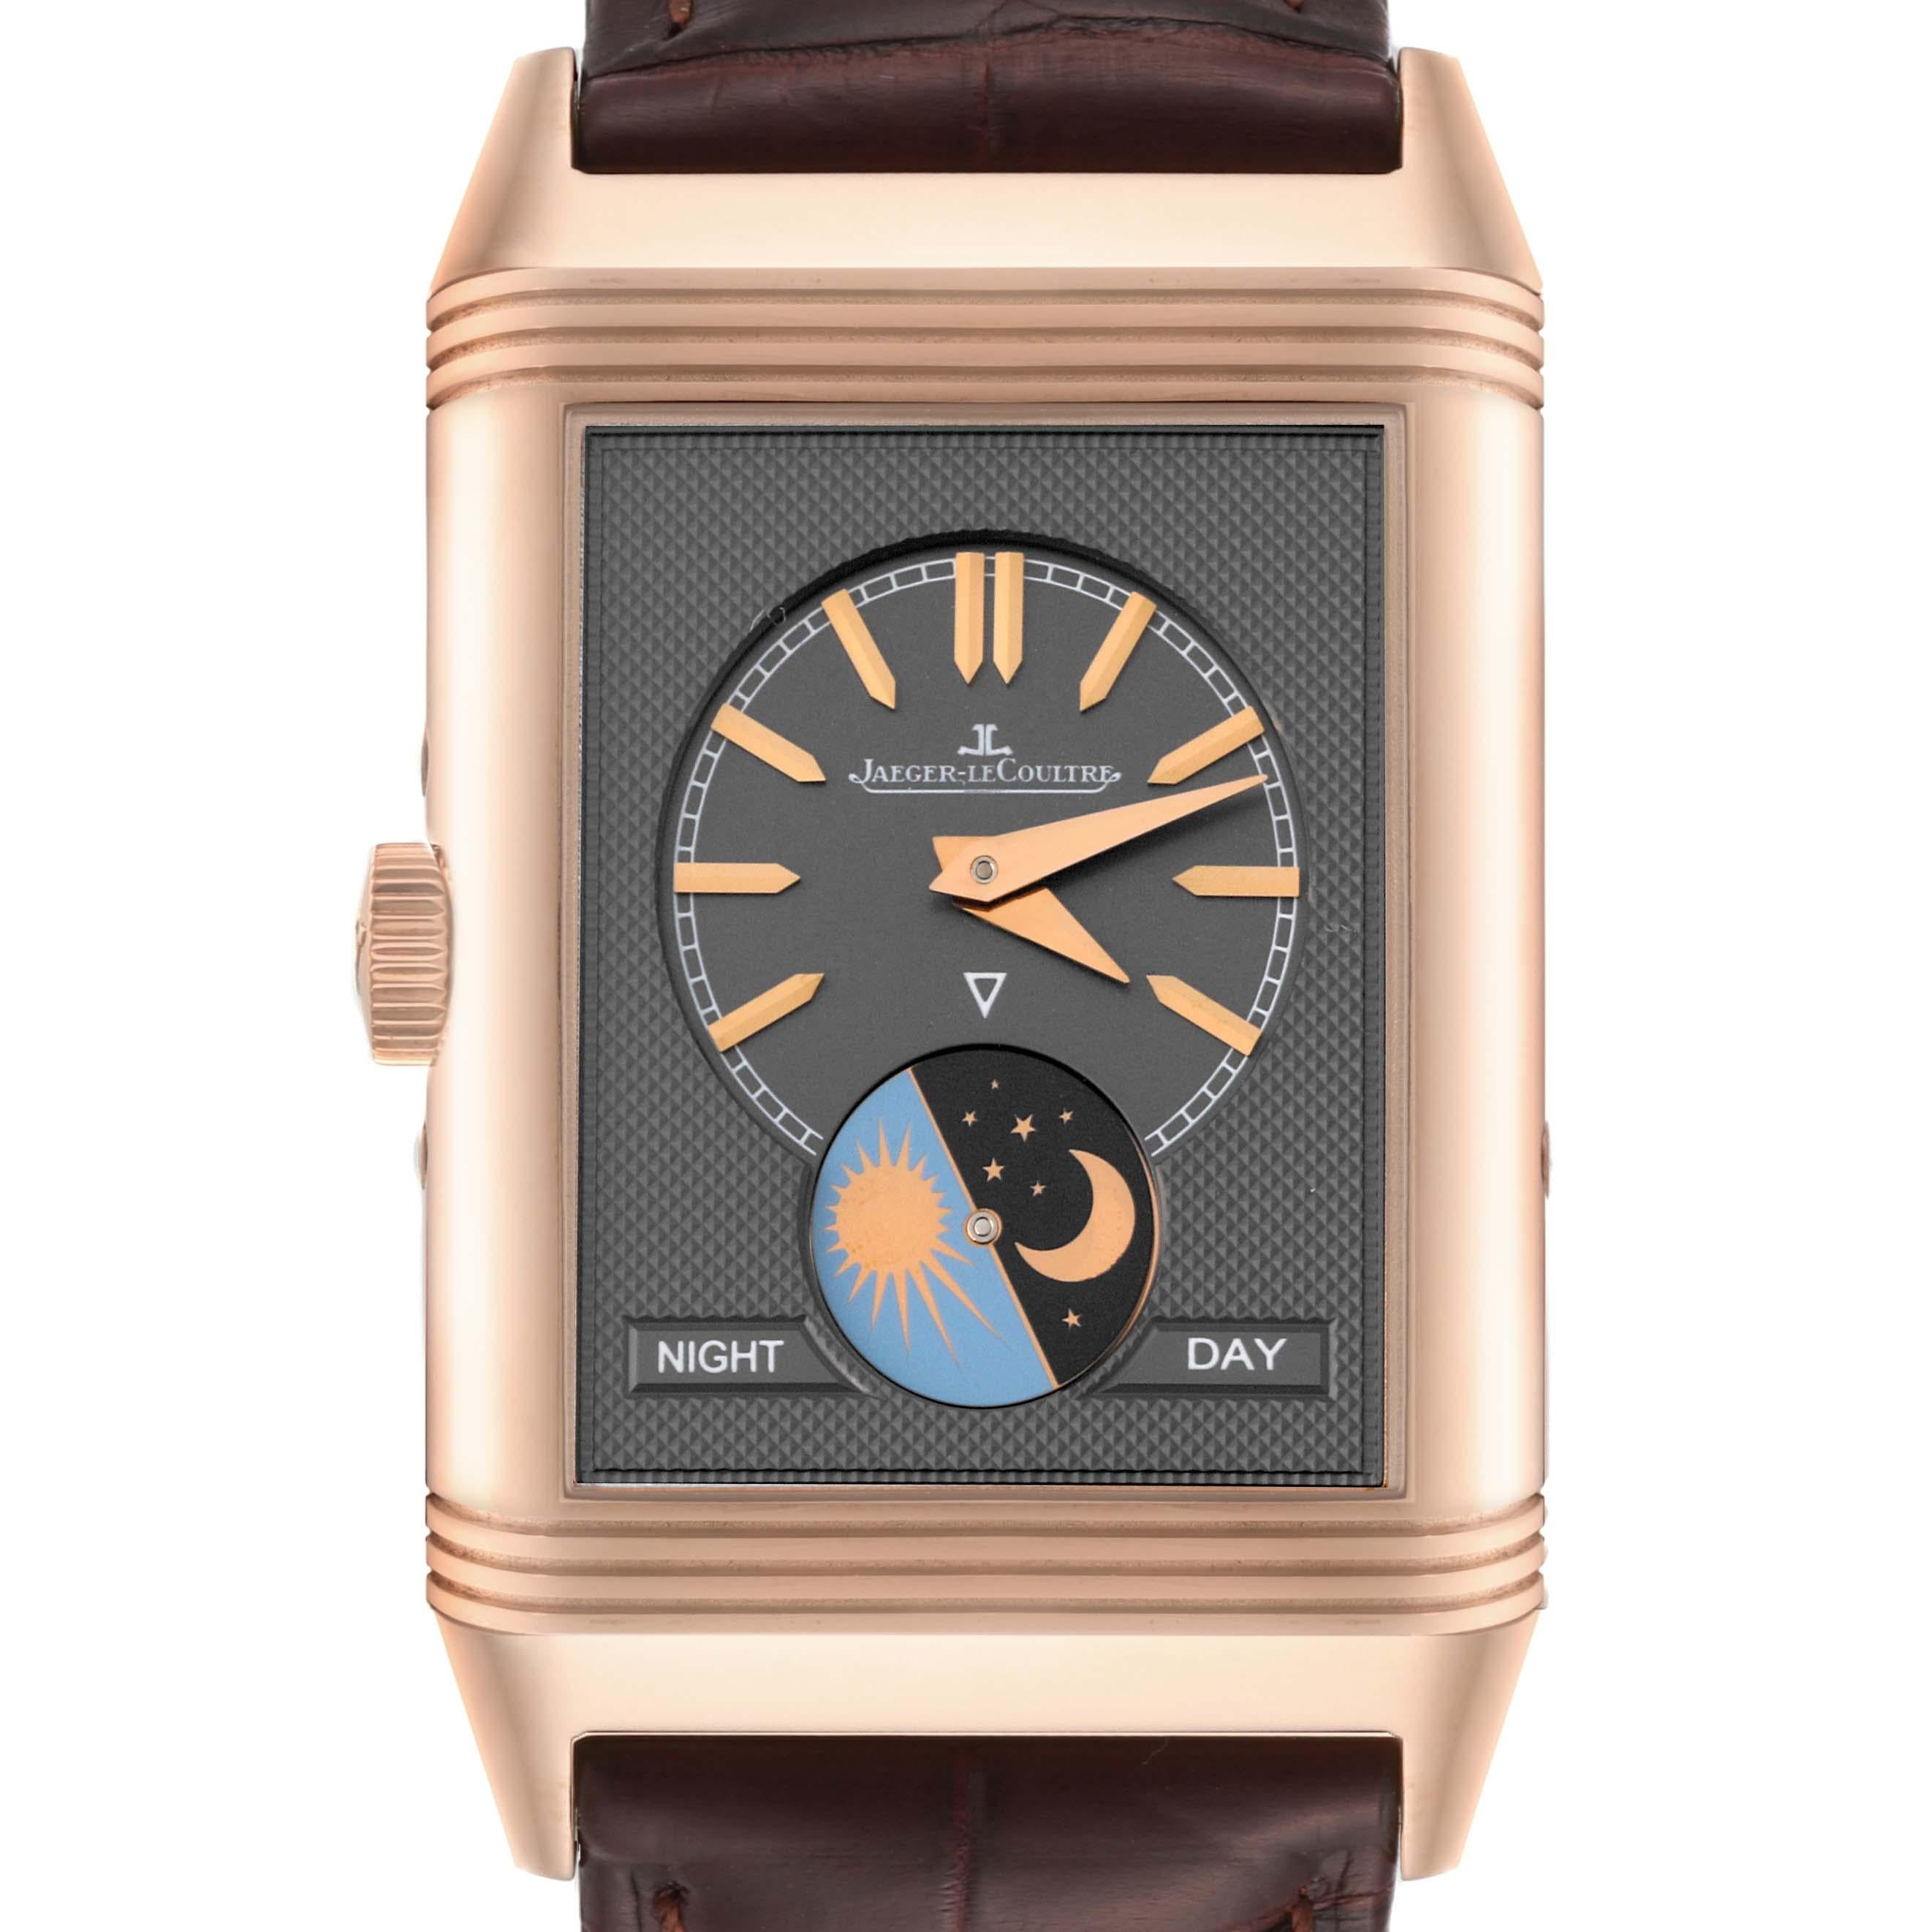 Jaeger LeCoultre Reverso Tribute Duoface Rose Gold Mens Watch Q3912420 Card. Manual-winding movement. Rhodium plated with engine turned embellishment, 19 jewels, 223 components, a single barrel, blued screws, shock absorber system, straight-line